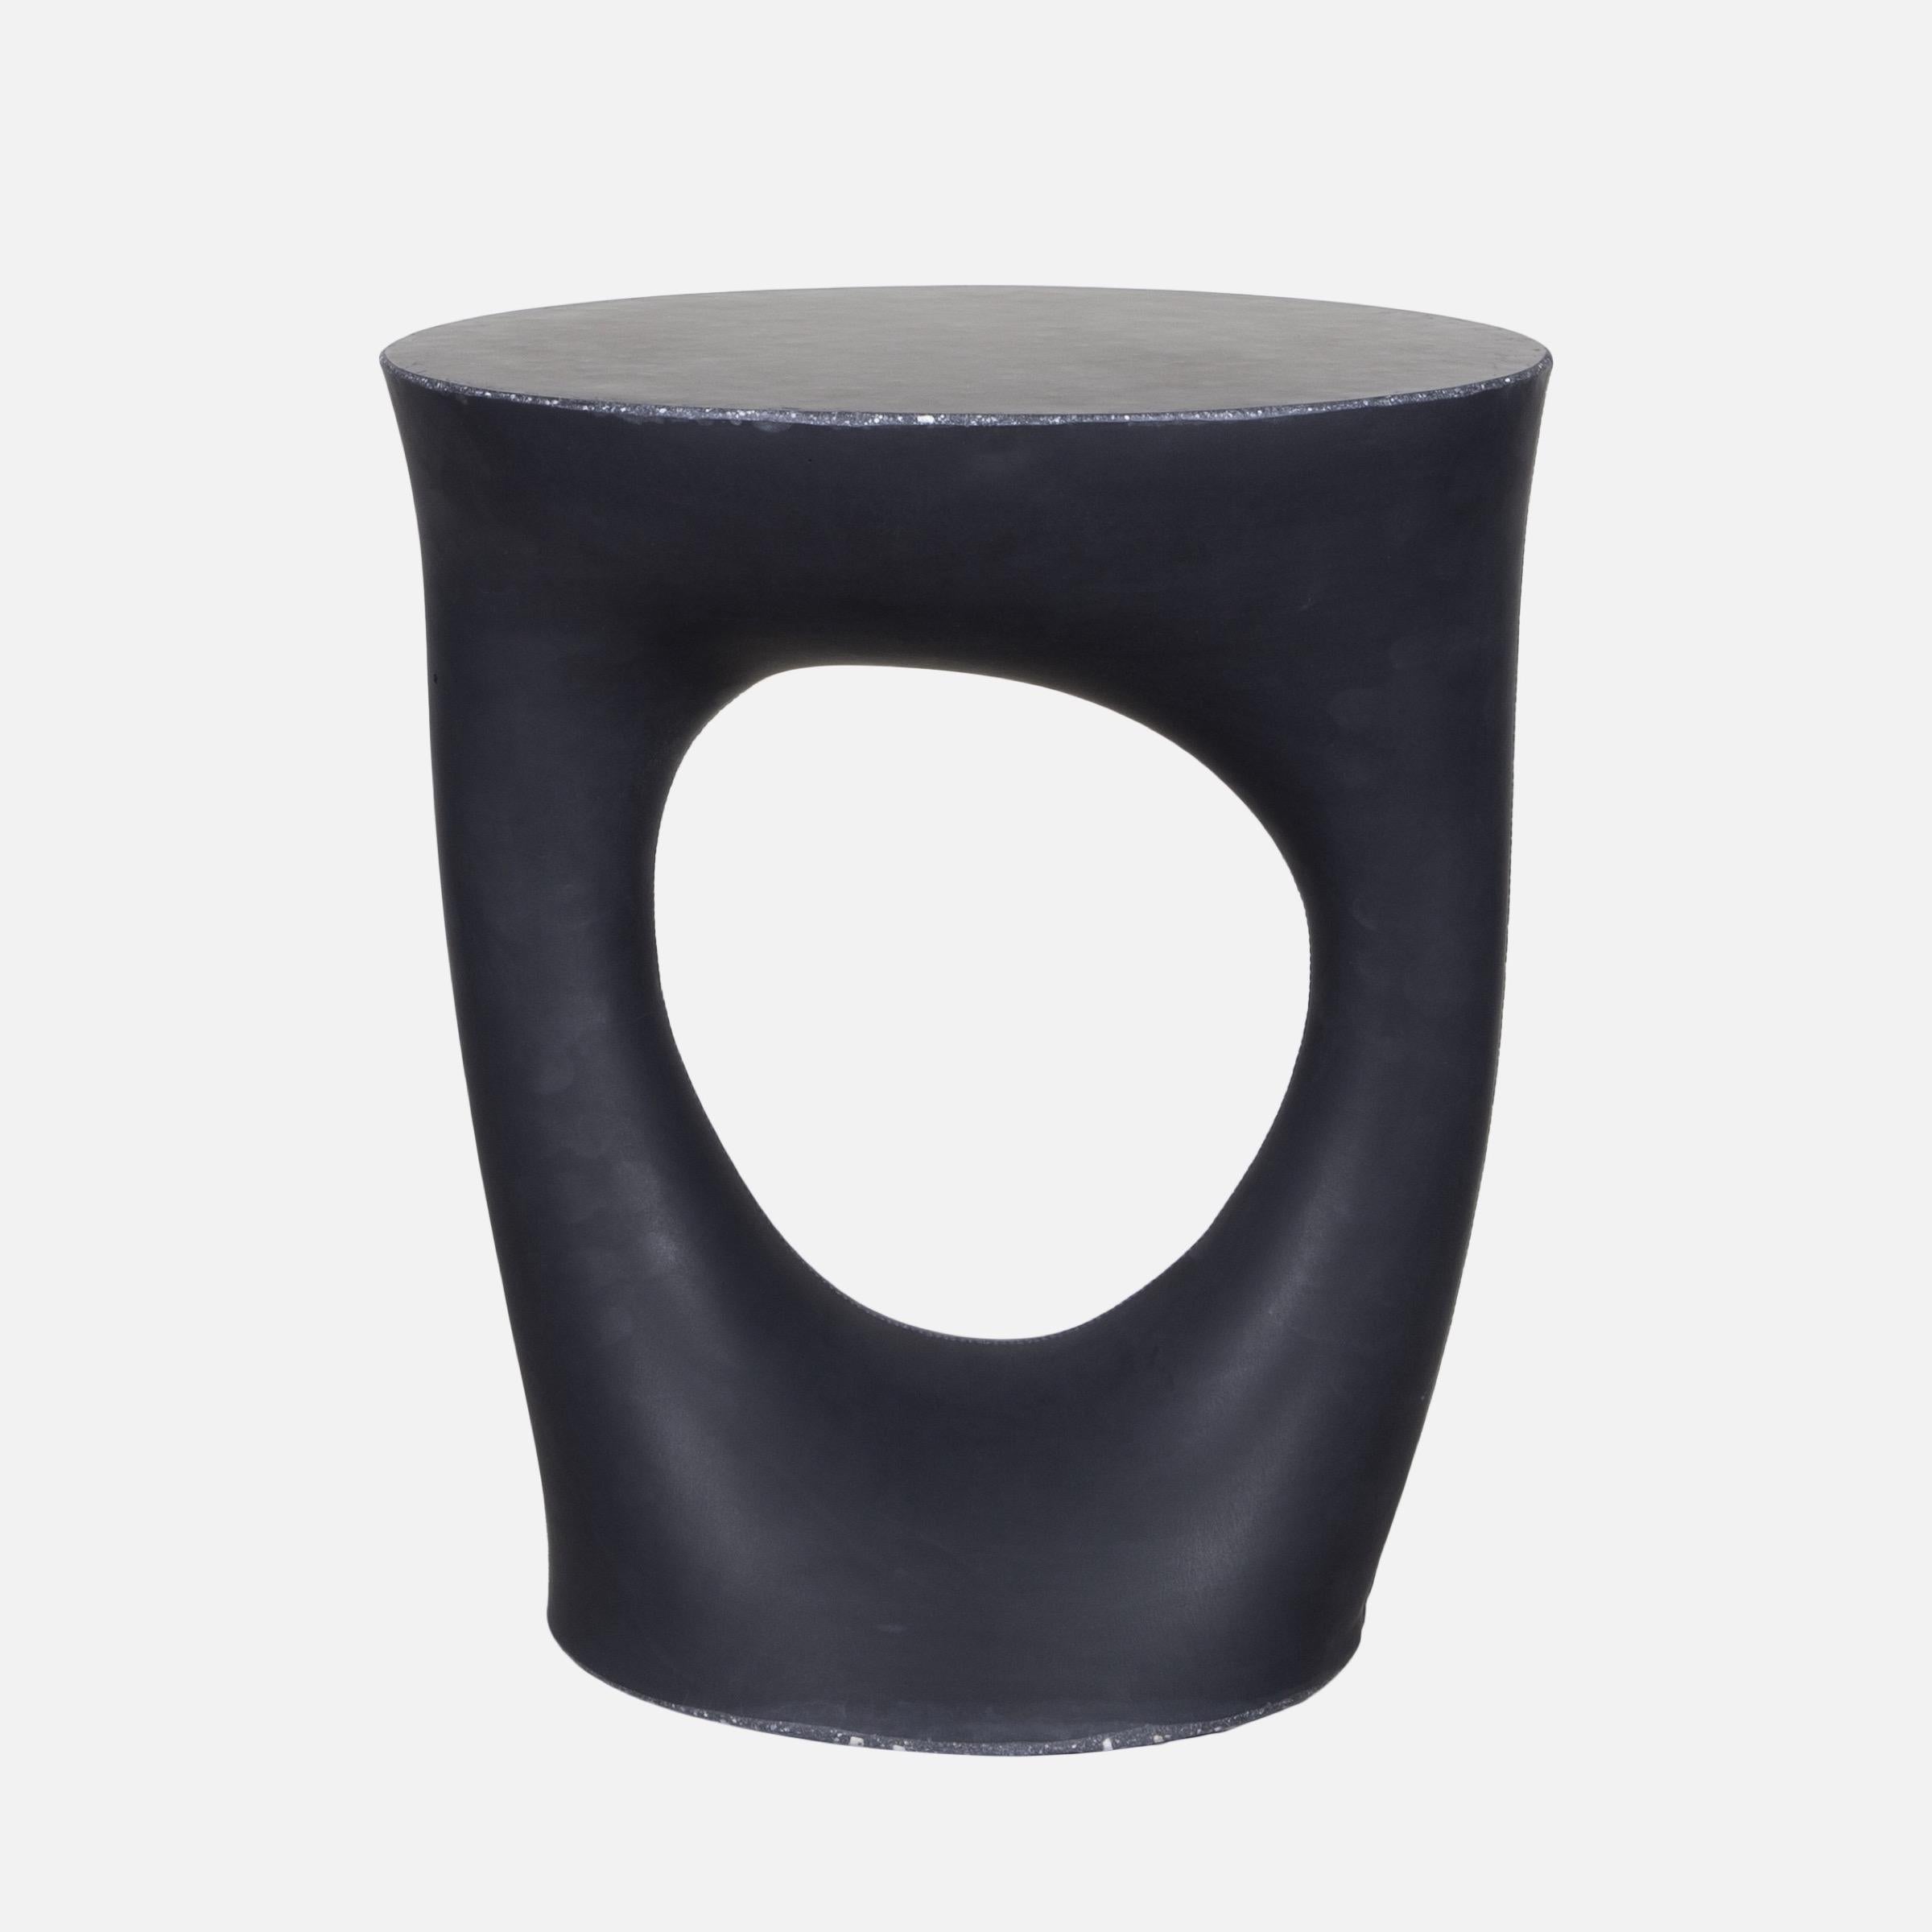 American Pair of Black Kreten Side Tables from Souda, Made to Order